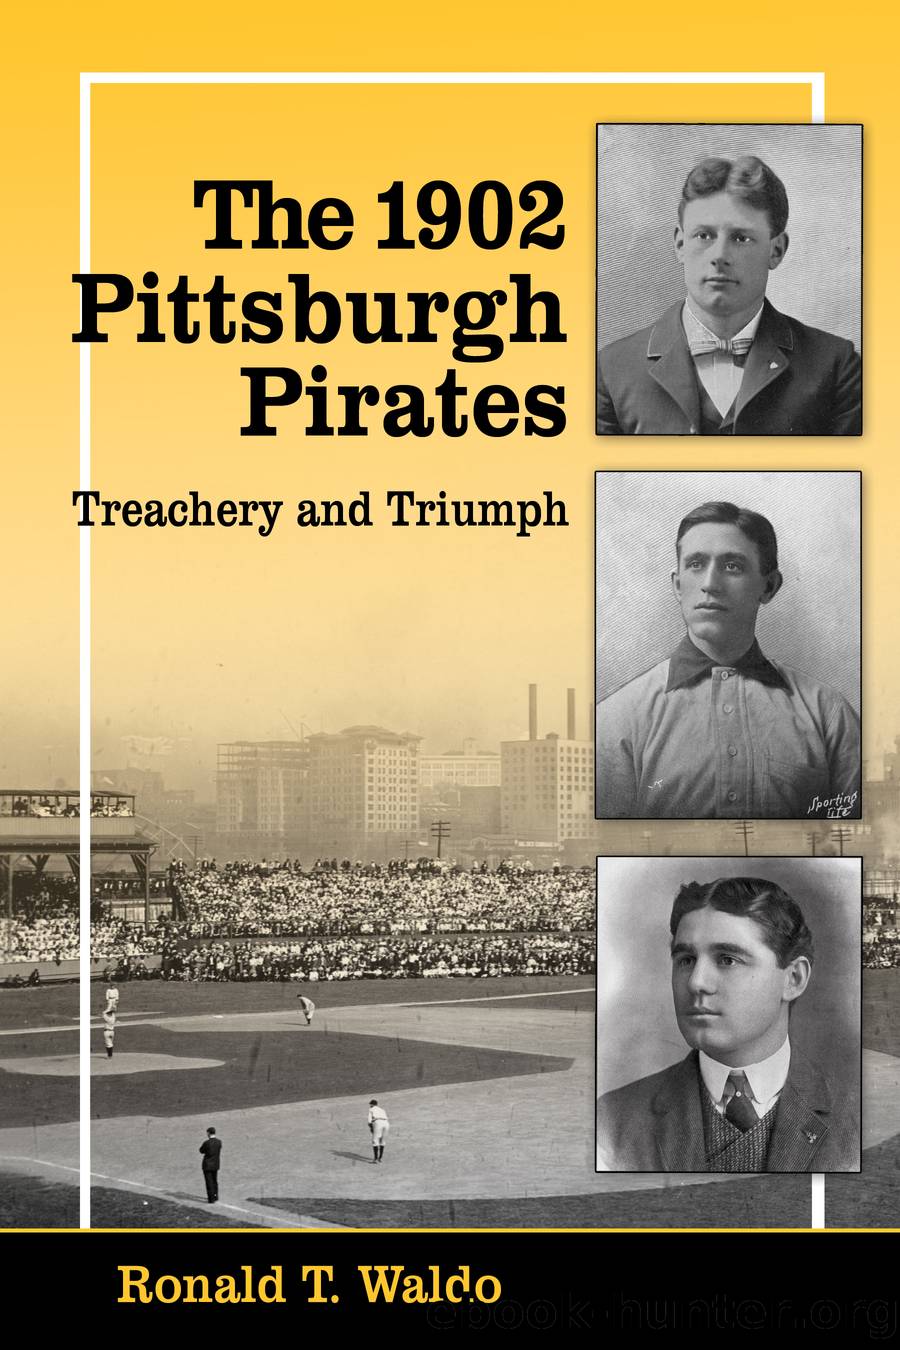 The 1902 Pittsburgh Pirates by Ronald T. Waldo